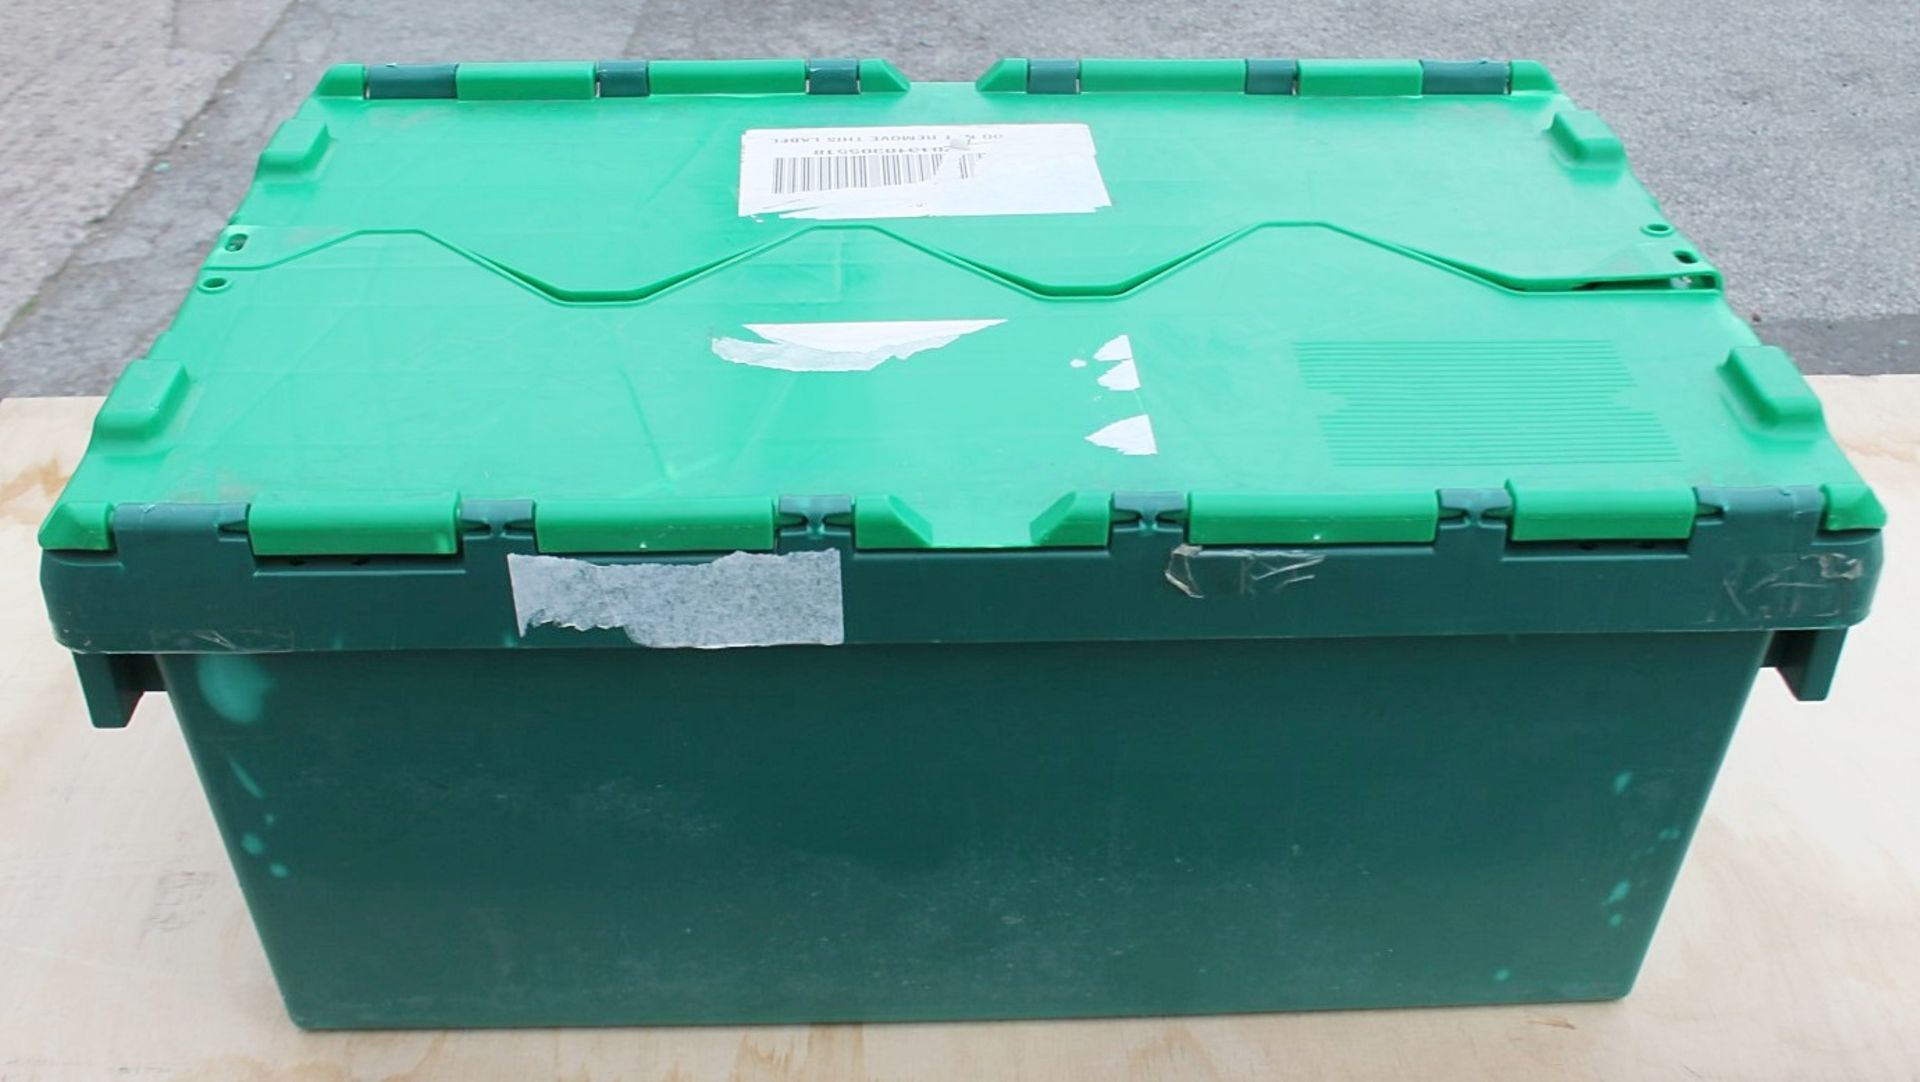 20 x Robust Low Profile Green Plastic Secure Storage Boxes With Attached Hinged Lids - Dimensions: - Image 4 of 6